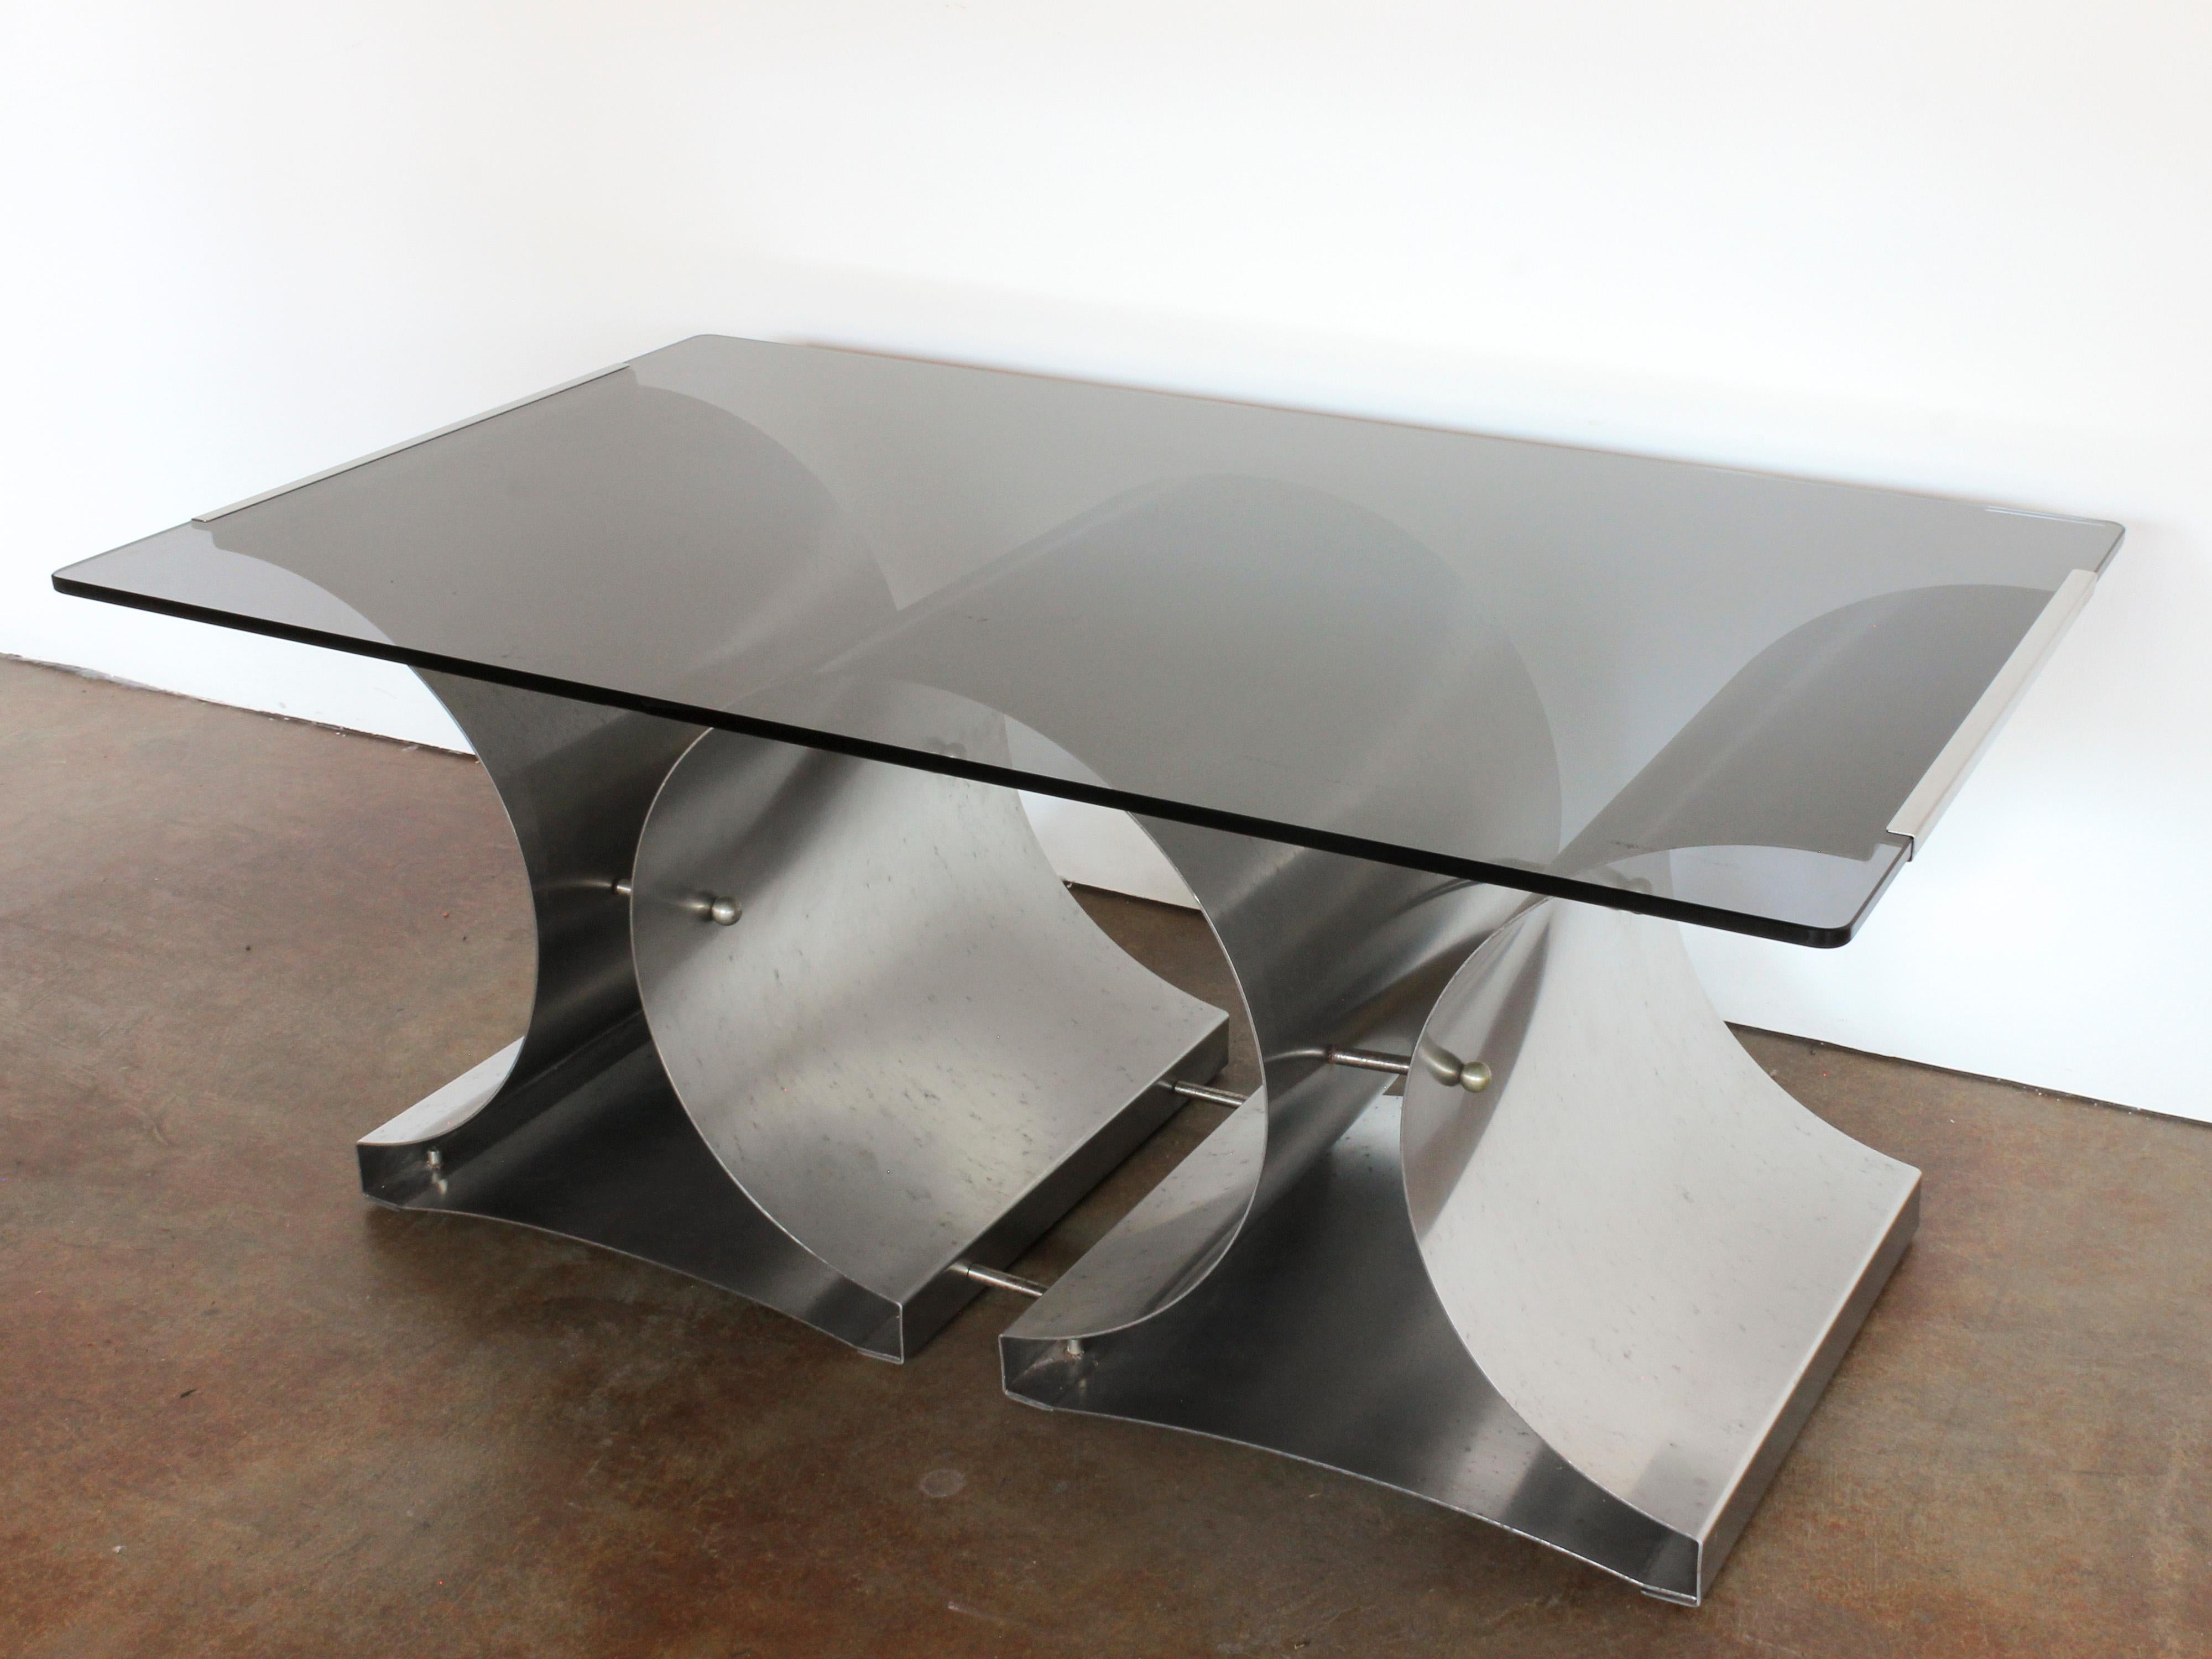 Late 20th Century Steel and Glass Coffee Table by Francois Monnet for Kappa, French, c. 1970